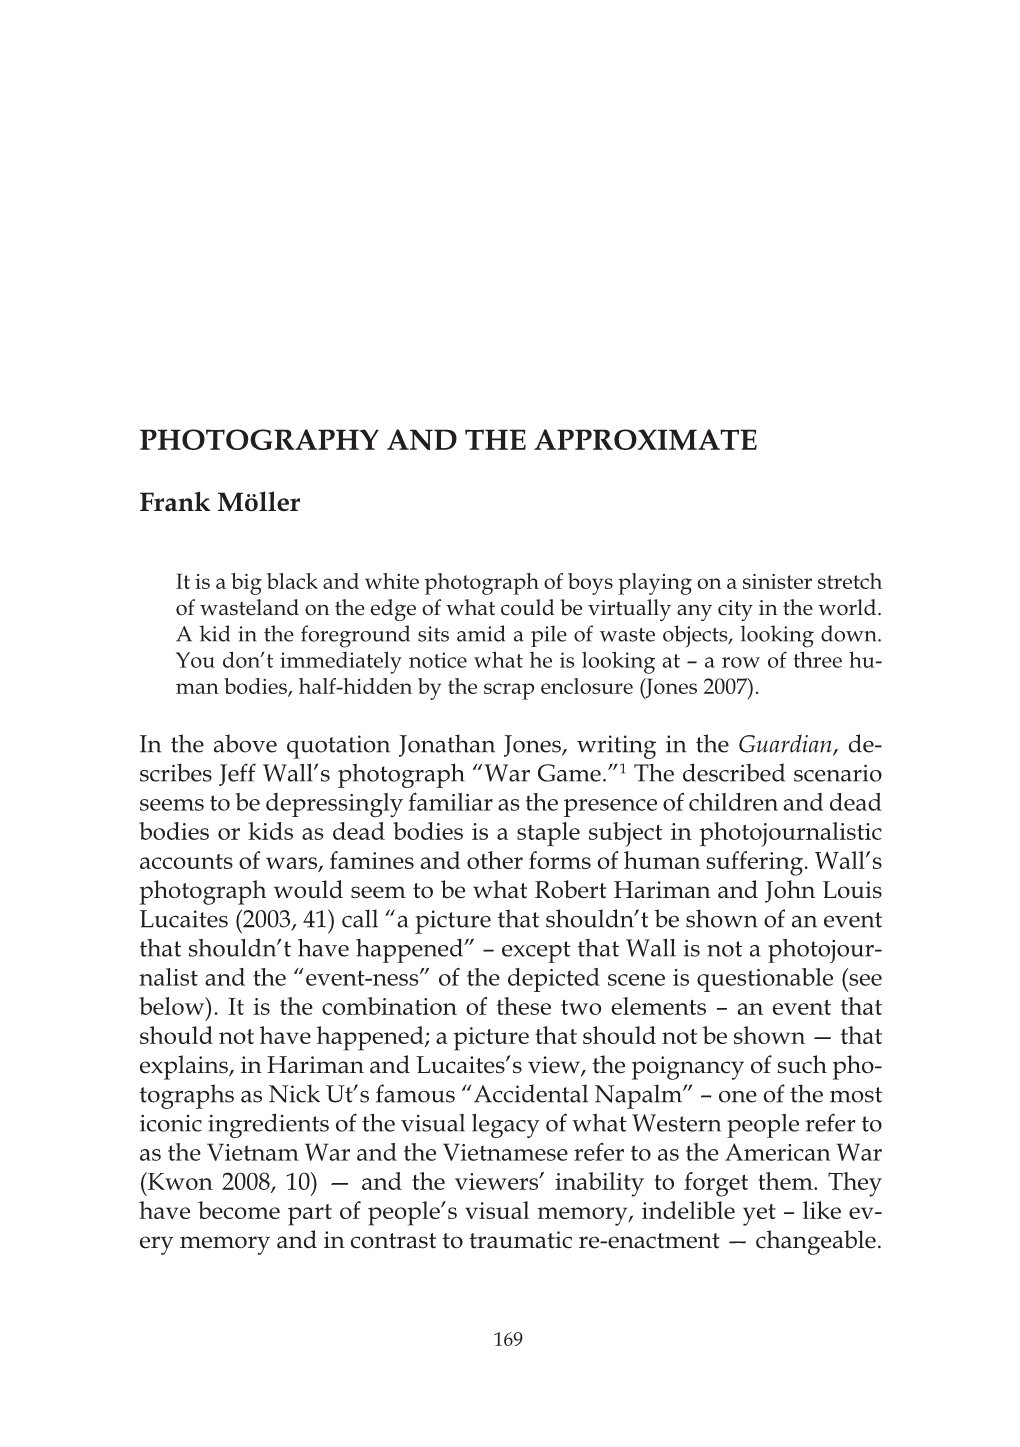 Photography and the Approximate